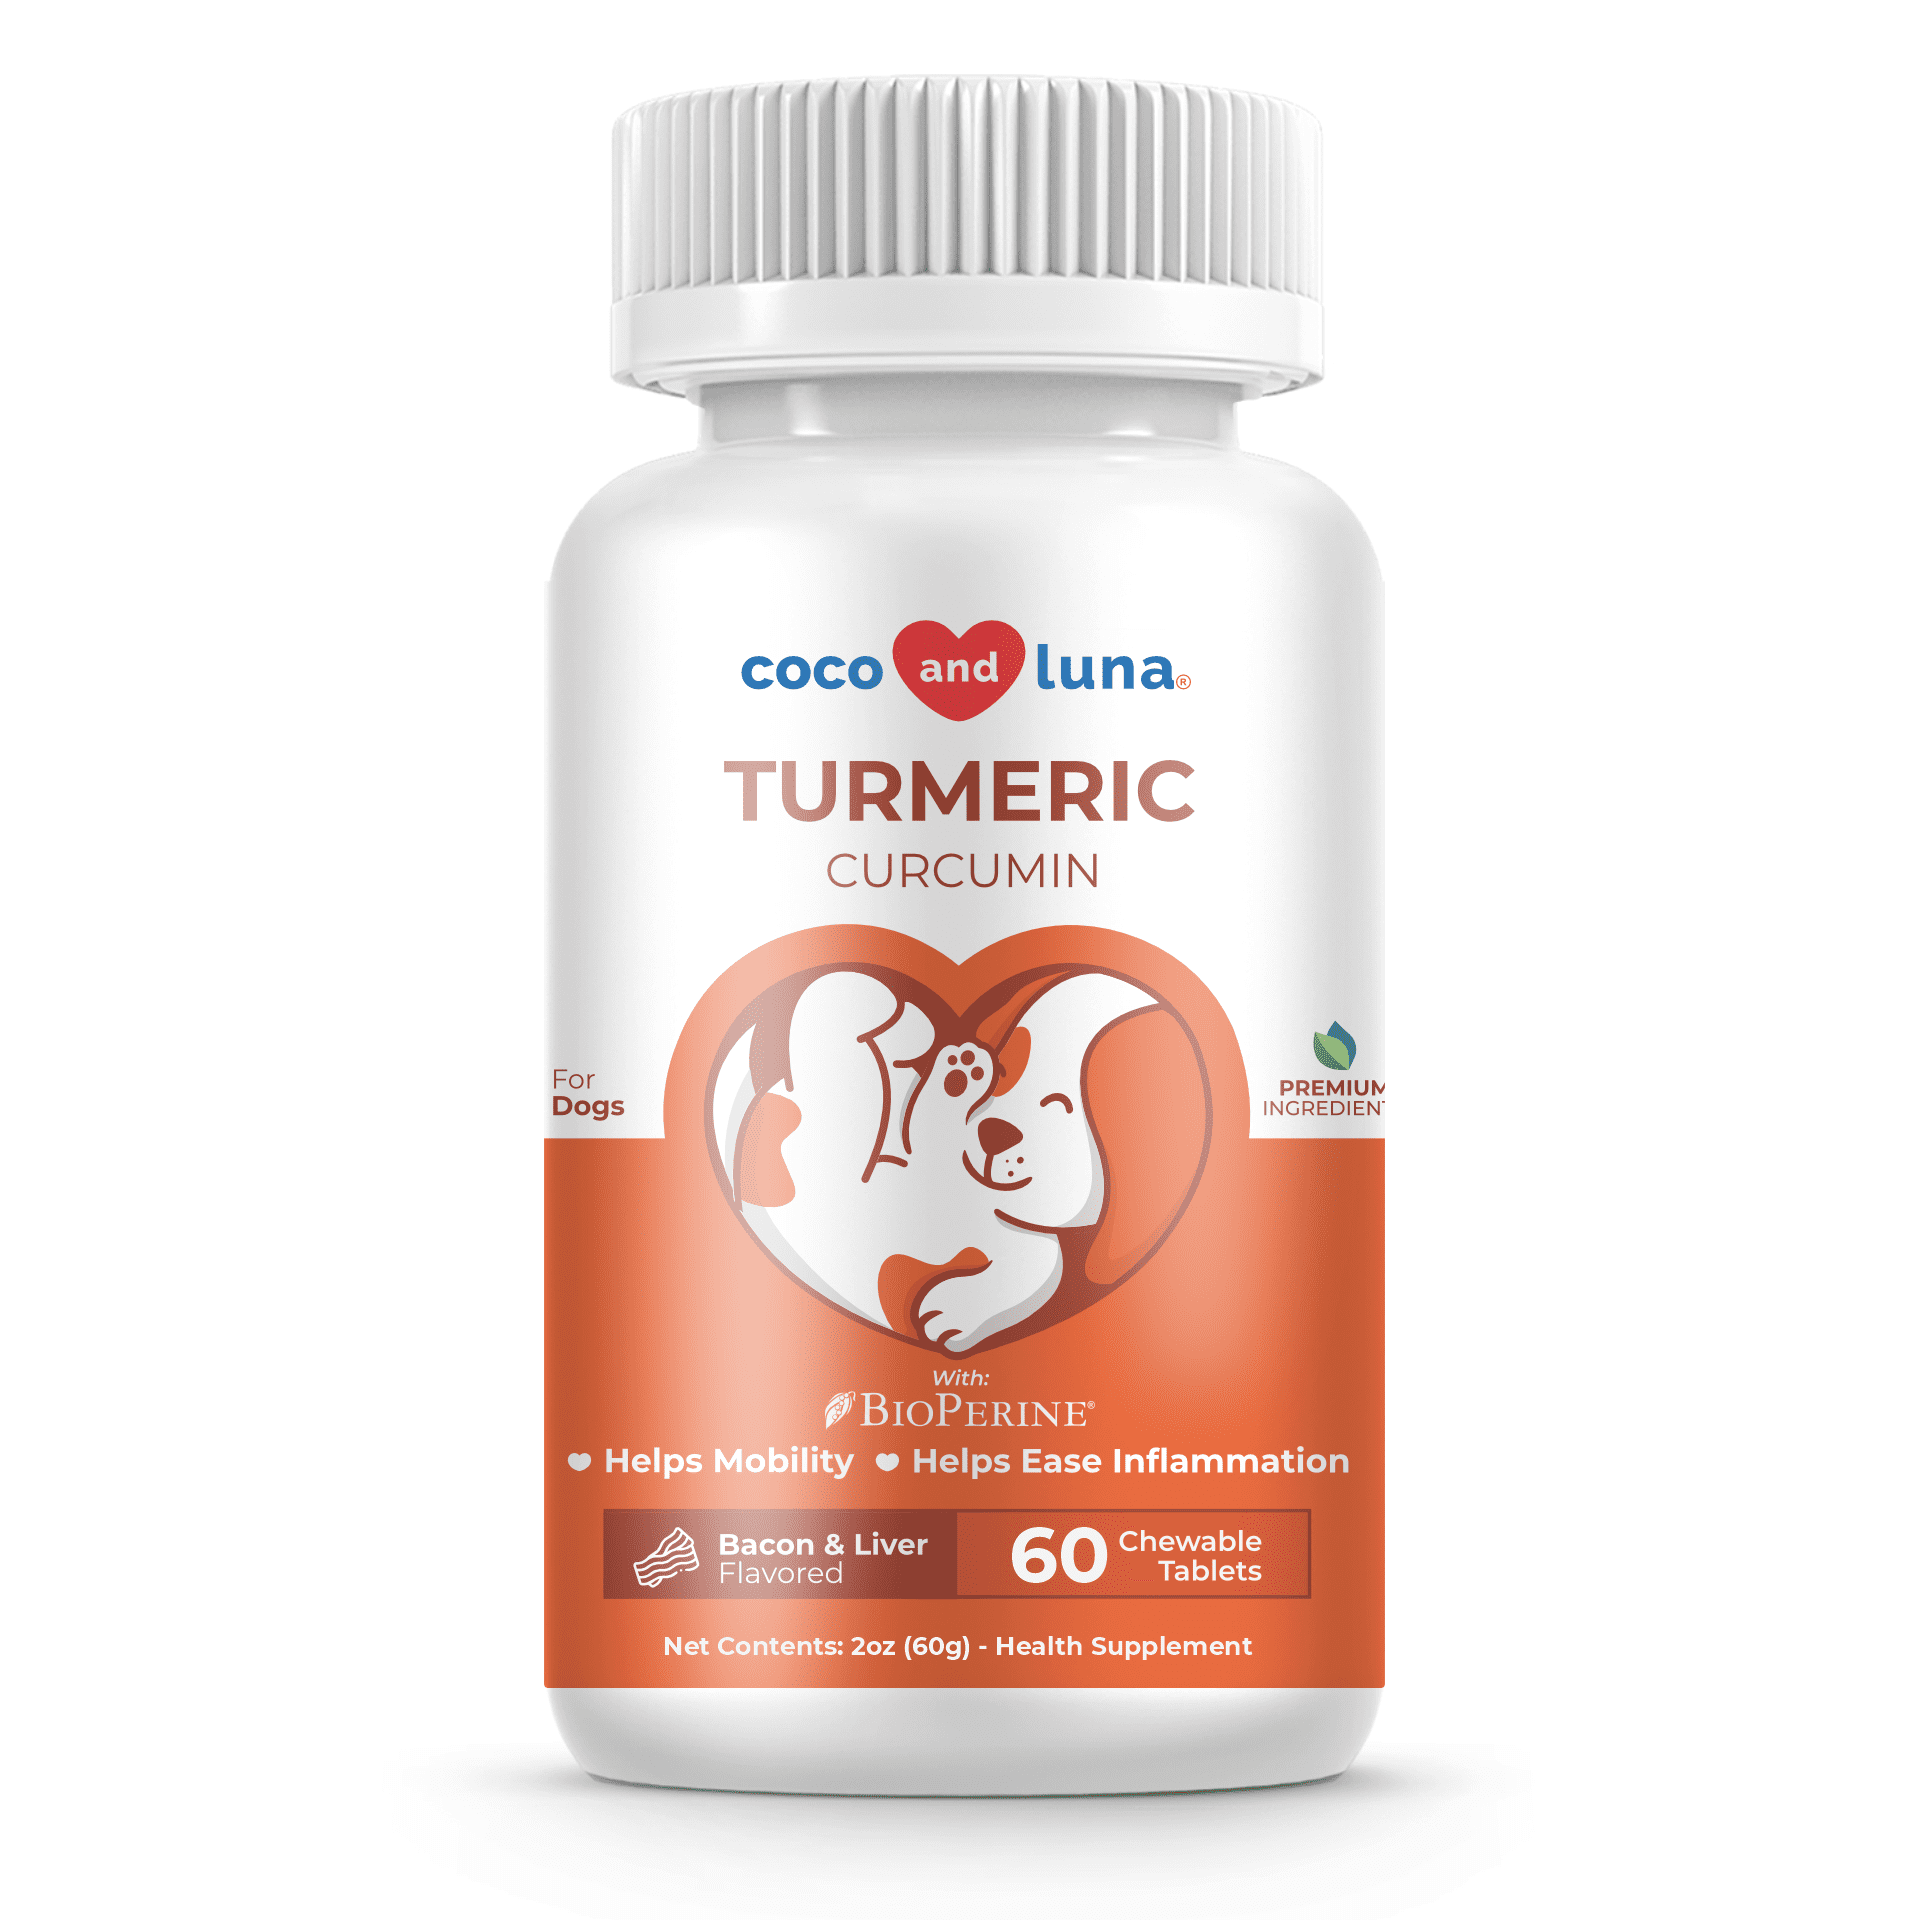 Turmeric for Dogs - 60 Chewable Tablets - Coco and Luna